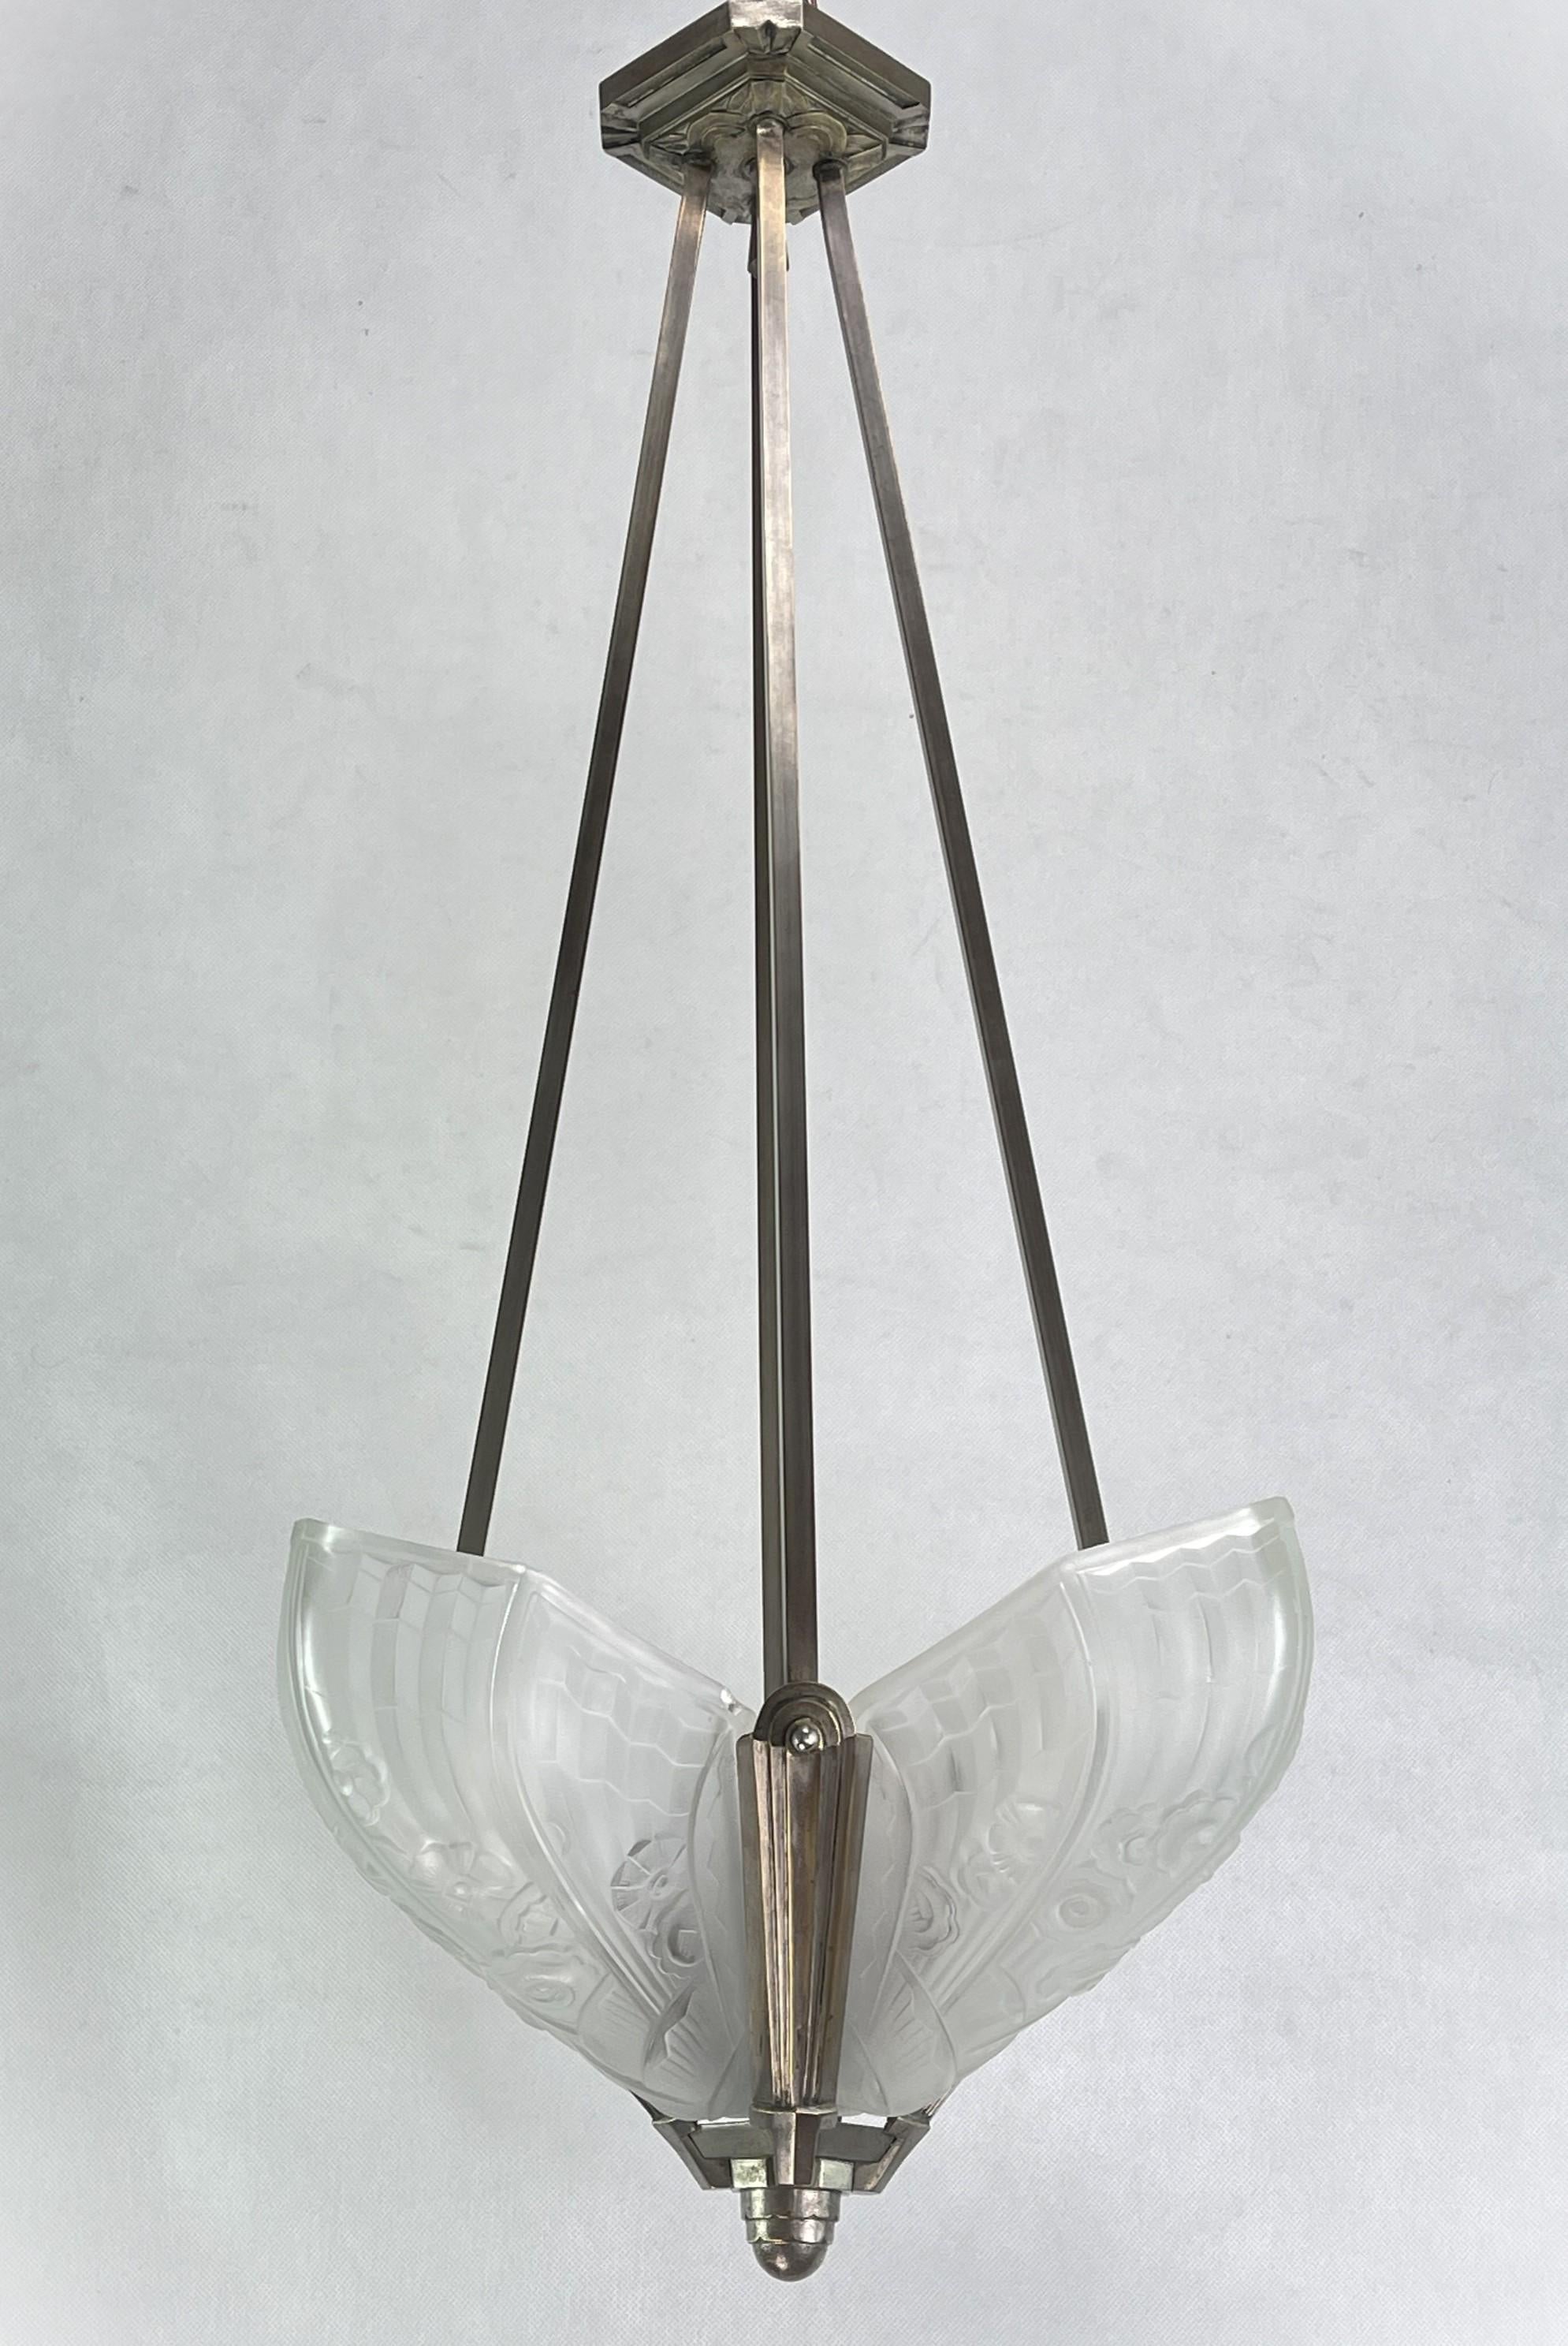 French Art Deco Chandelier Hanging Lamp by Jean Gauthier for J. Robert Paris, 1930s For Sale